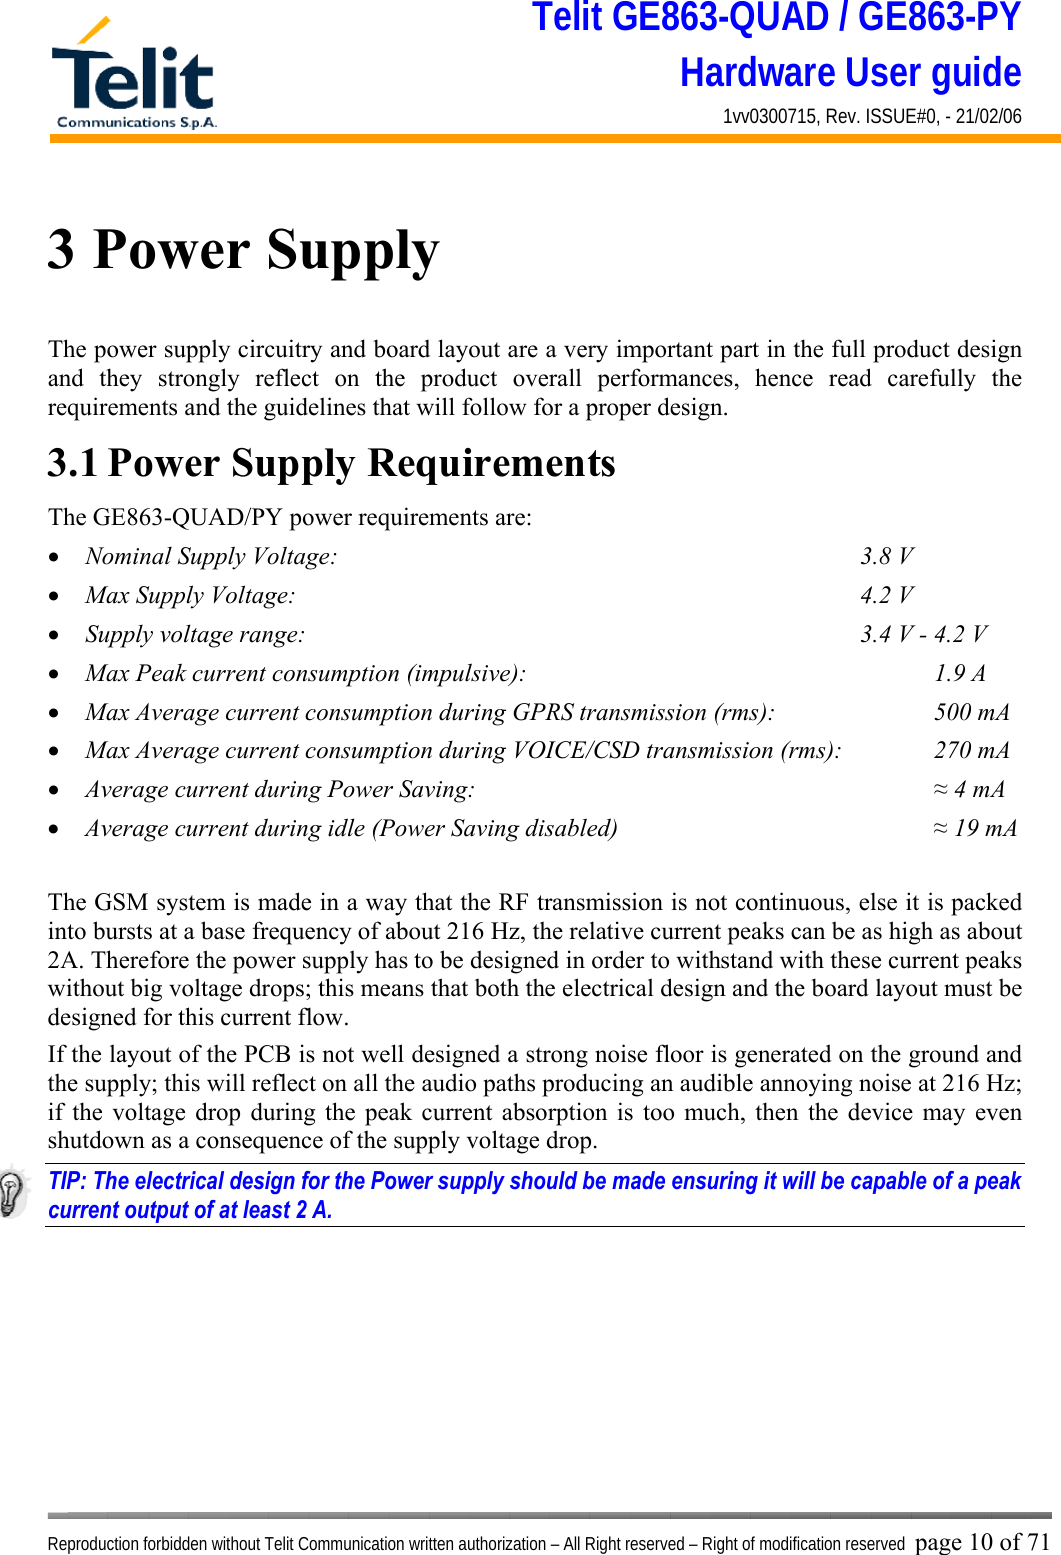 Telit GE863-QUAD / GE863-PY Hardware User guide 1vv0300715, Rev. ISSUE#0, - 21/02/06    Reproduction forbidden without Telit Communication written authorization – All Right reserved – Right of modification reserved page 10 of 71 3 Power Supply The power supply circuitry and board layout are a very important part in the full product design and they strongly reflect on the product overall performances, hence read carefully the requirements and the guidelines that will follow for a proper design. 3.1 Power Supply Requirements The GE863-QUAD/PY power requirements are: •  Nominal Supply Voltage:        3.8 V •  Max Supply Voltage:        4.2 V •  Supply voltage range:                      3.4 V - 4.2 V •  Max Peak current consumption (impulsive):             1.9 A •  Max Average current consumption during GPRS transmission (rms):      500 mA •  Max Average current consumption during VOICE/CSD transmission (rms):    270 mA •  Average current during Power Saving:               ≈ 4 mA •  Average current during idle (Power Saving disabled)          ≈ 19 mA  The GSM system is made in a way that the RF transmission is not continuous, else it is packed into bursts at a base frequency of about 216 Hz, the relative current peaks can be as high as about 2A. Therefore the power supply has to be designed in order to withstand with these current peaks without big voltage drops; this means that both the electrical design and the board layout must be designed for this current flow. If the layout of the PCB is not well designed a strong noise floor is generated on the ground and the supply; this will reflect on all the audio paths producing an audible annoying noise at 216 Hz; if the voltage drop during the peak current absorption is too much, then the device may even shutdown as a consequence of the supply voltage drop. TIP: The electrical design for the Power supply should be made ensuring it will be capable of a peak current output of at least 2 A.  